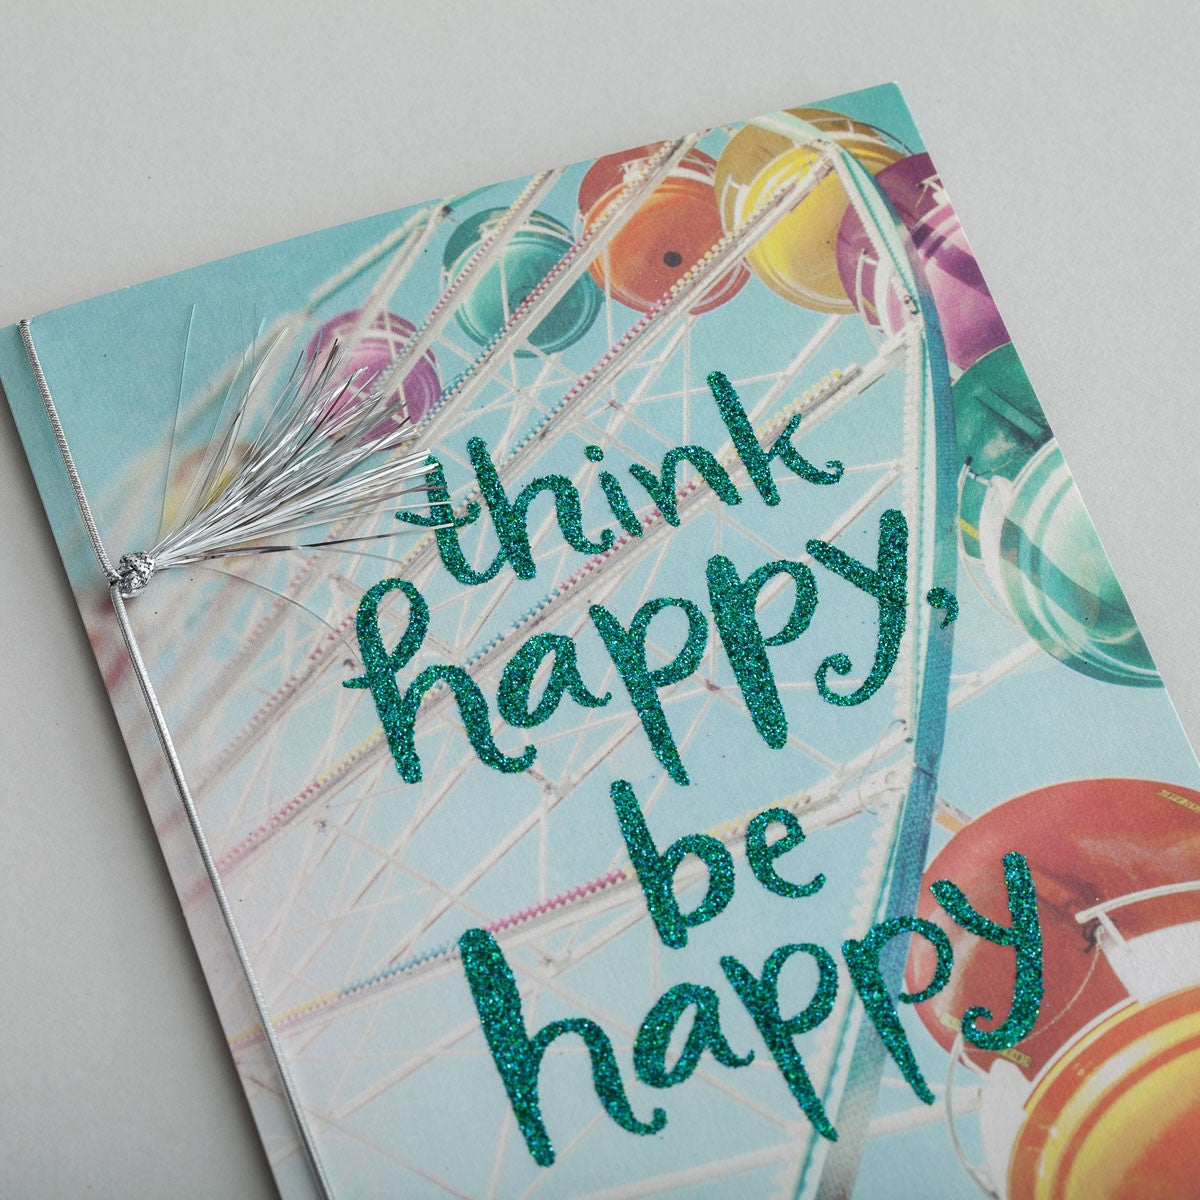 Thinking of You - Think Happy Card - Southern Grace Creations